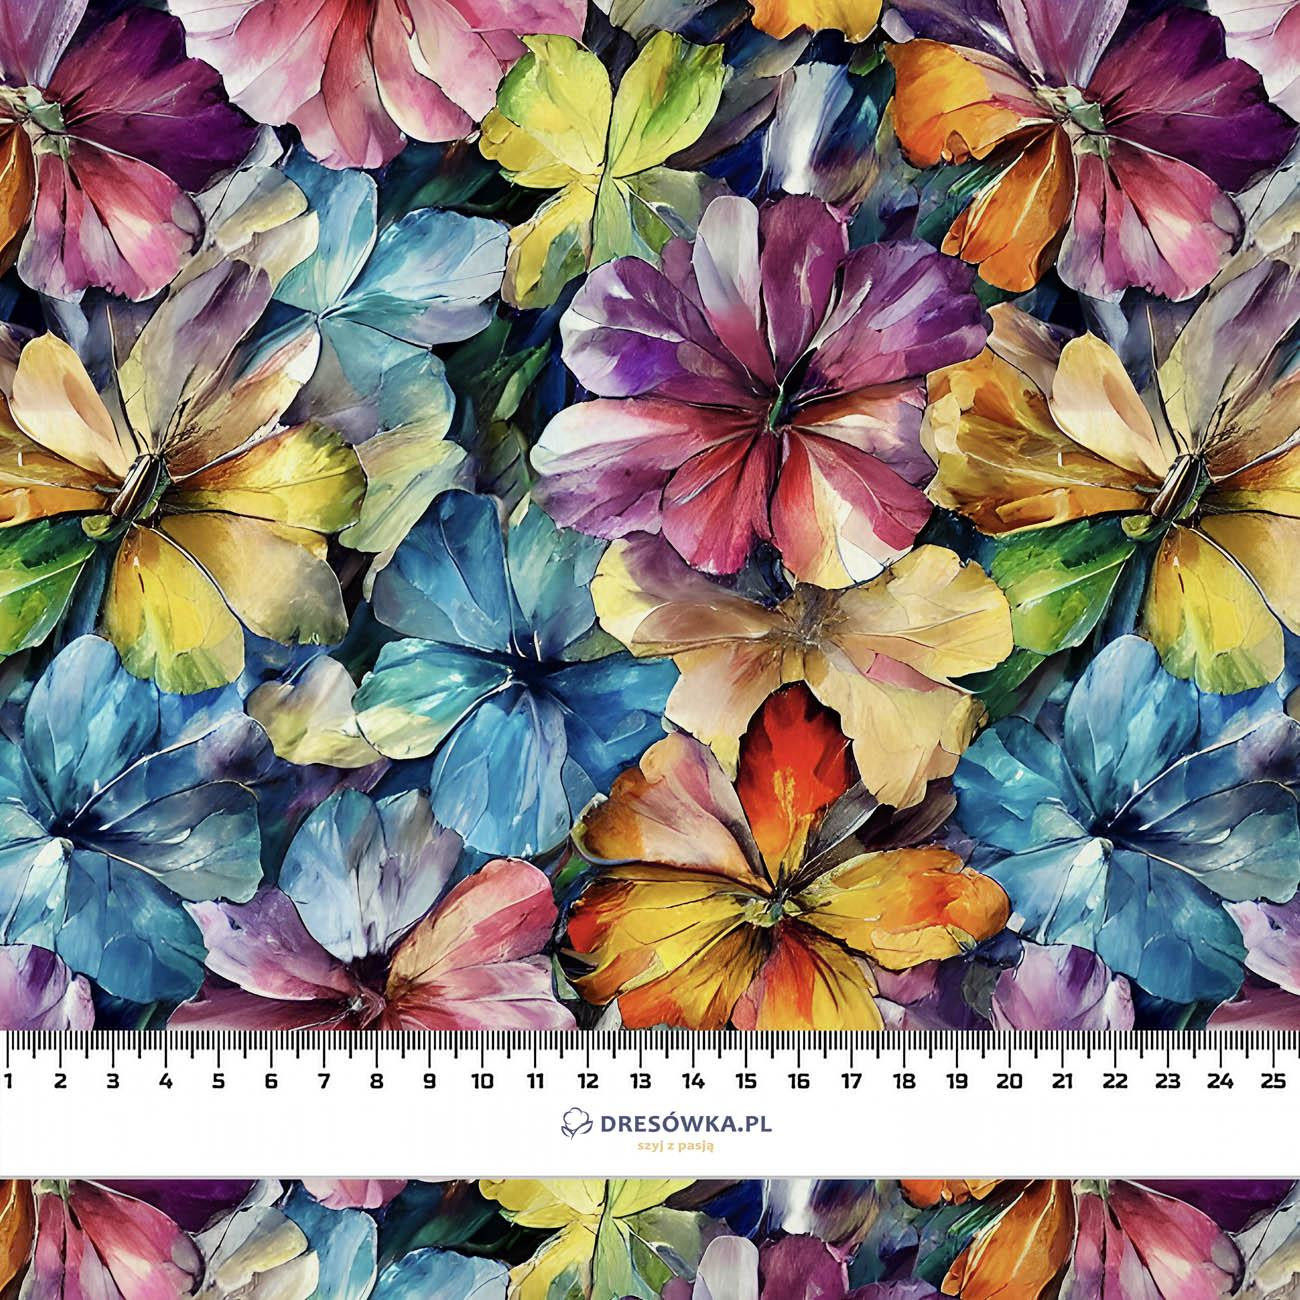 WATER-COLOR FLOWERS pat. 8 - quick-drying woven fabric